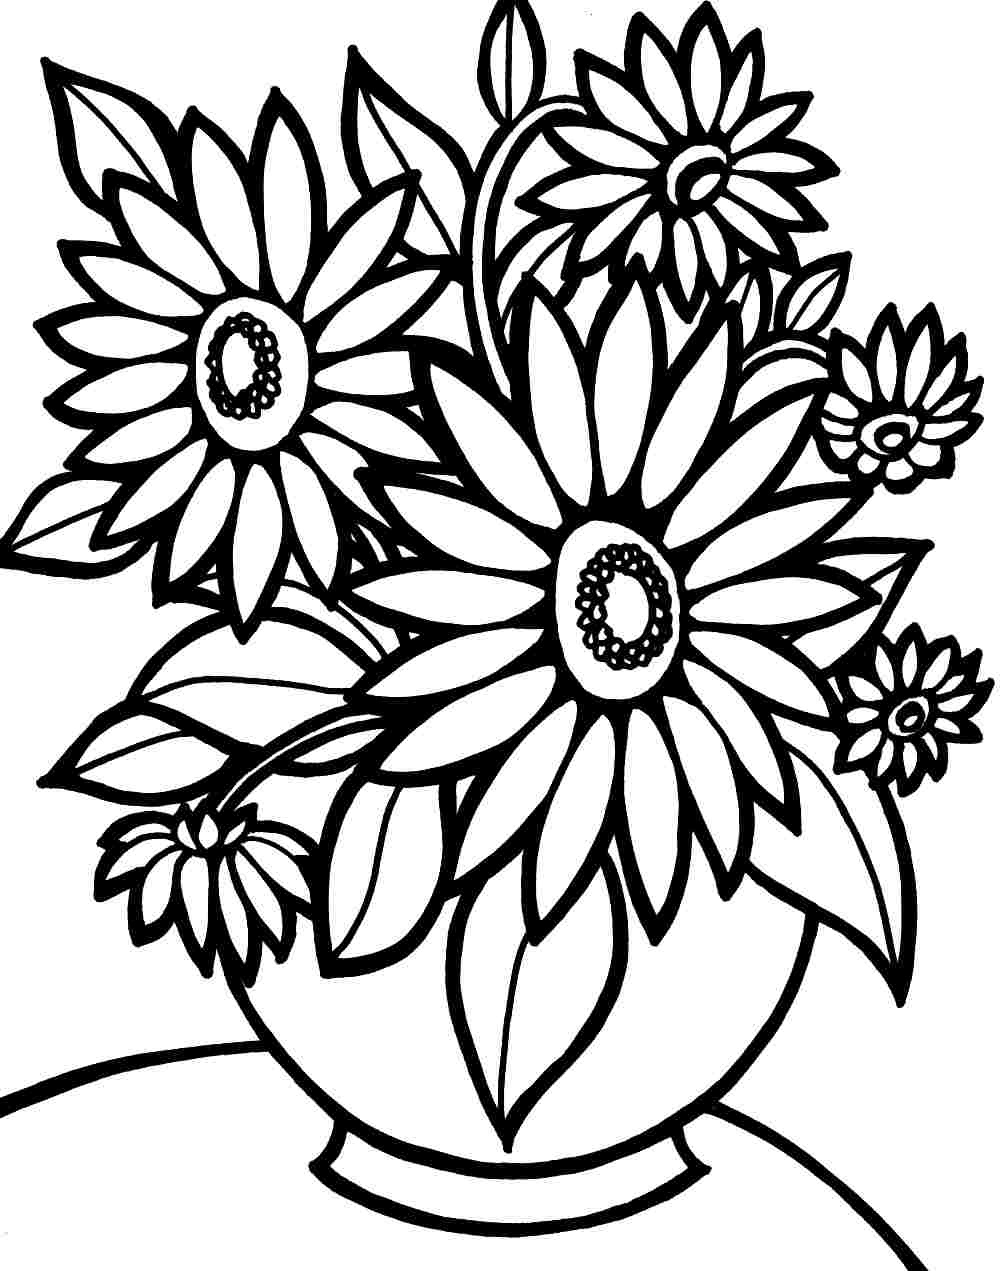 Flower Coloring Pages | Free Download Best Flower Coloring Pages On - Free Printable Flower Coloring Pages